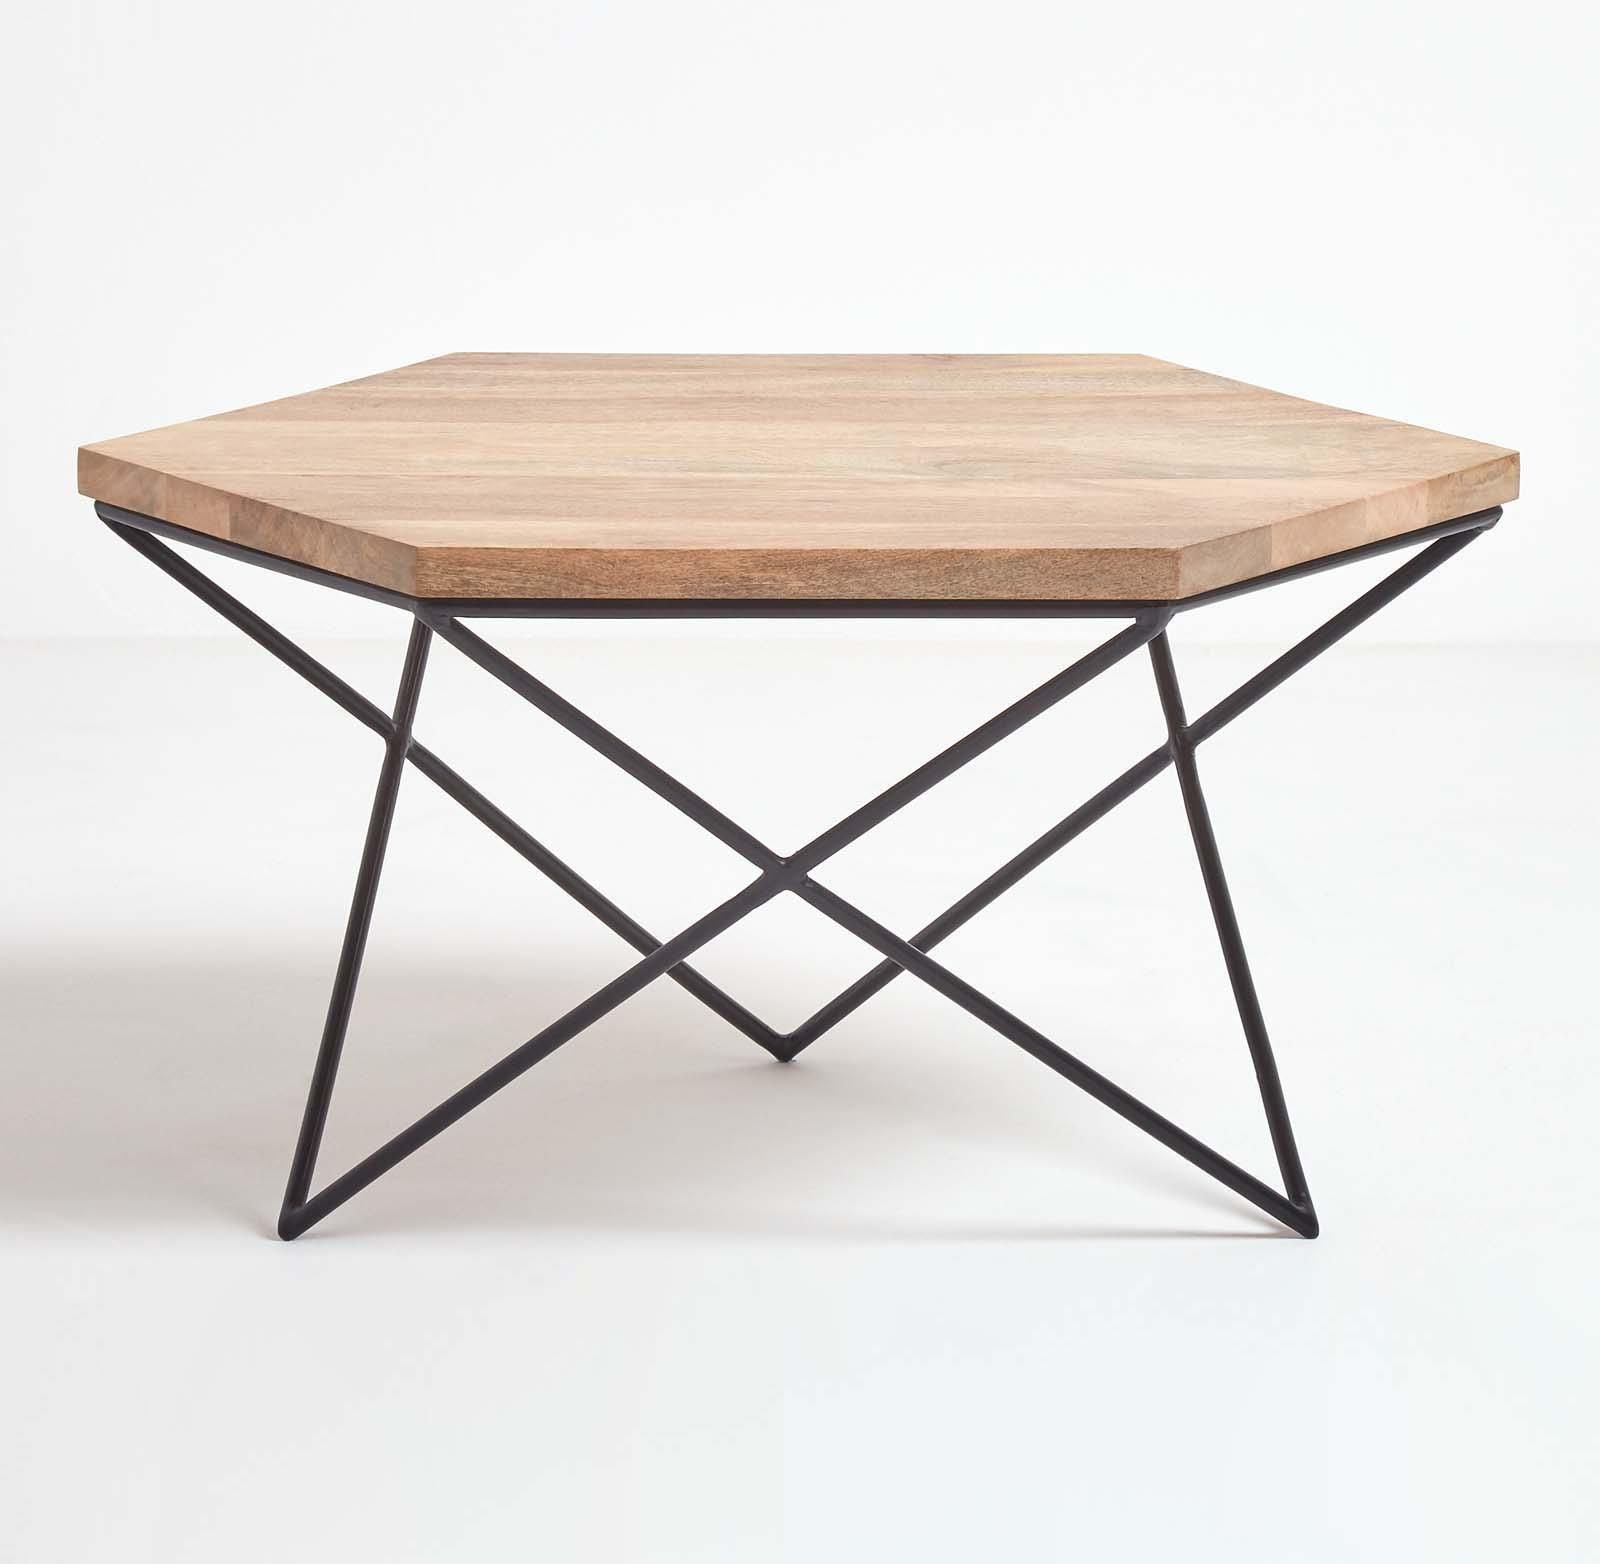 Newest Geometric Coffee Tables Intended For Orion Industrial Mango Wood Geometric Hexagon Coffee Table (View 1 of 20)